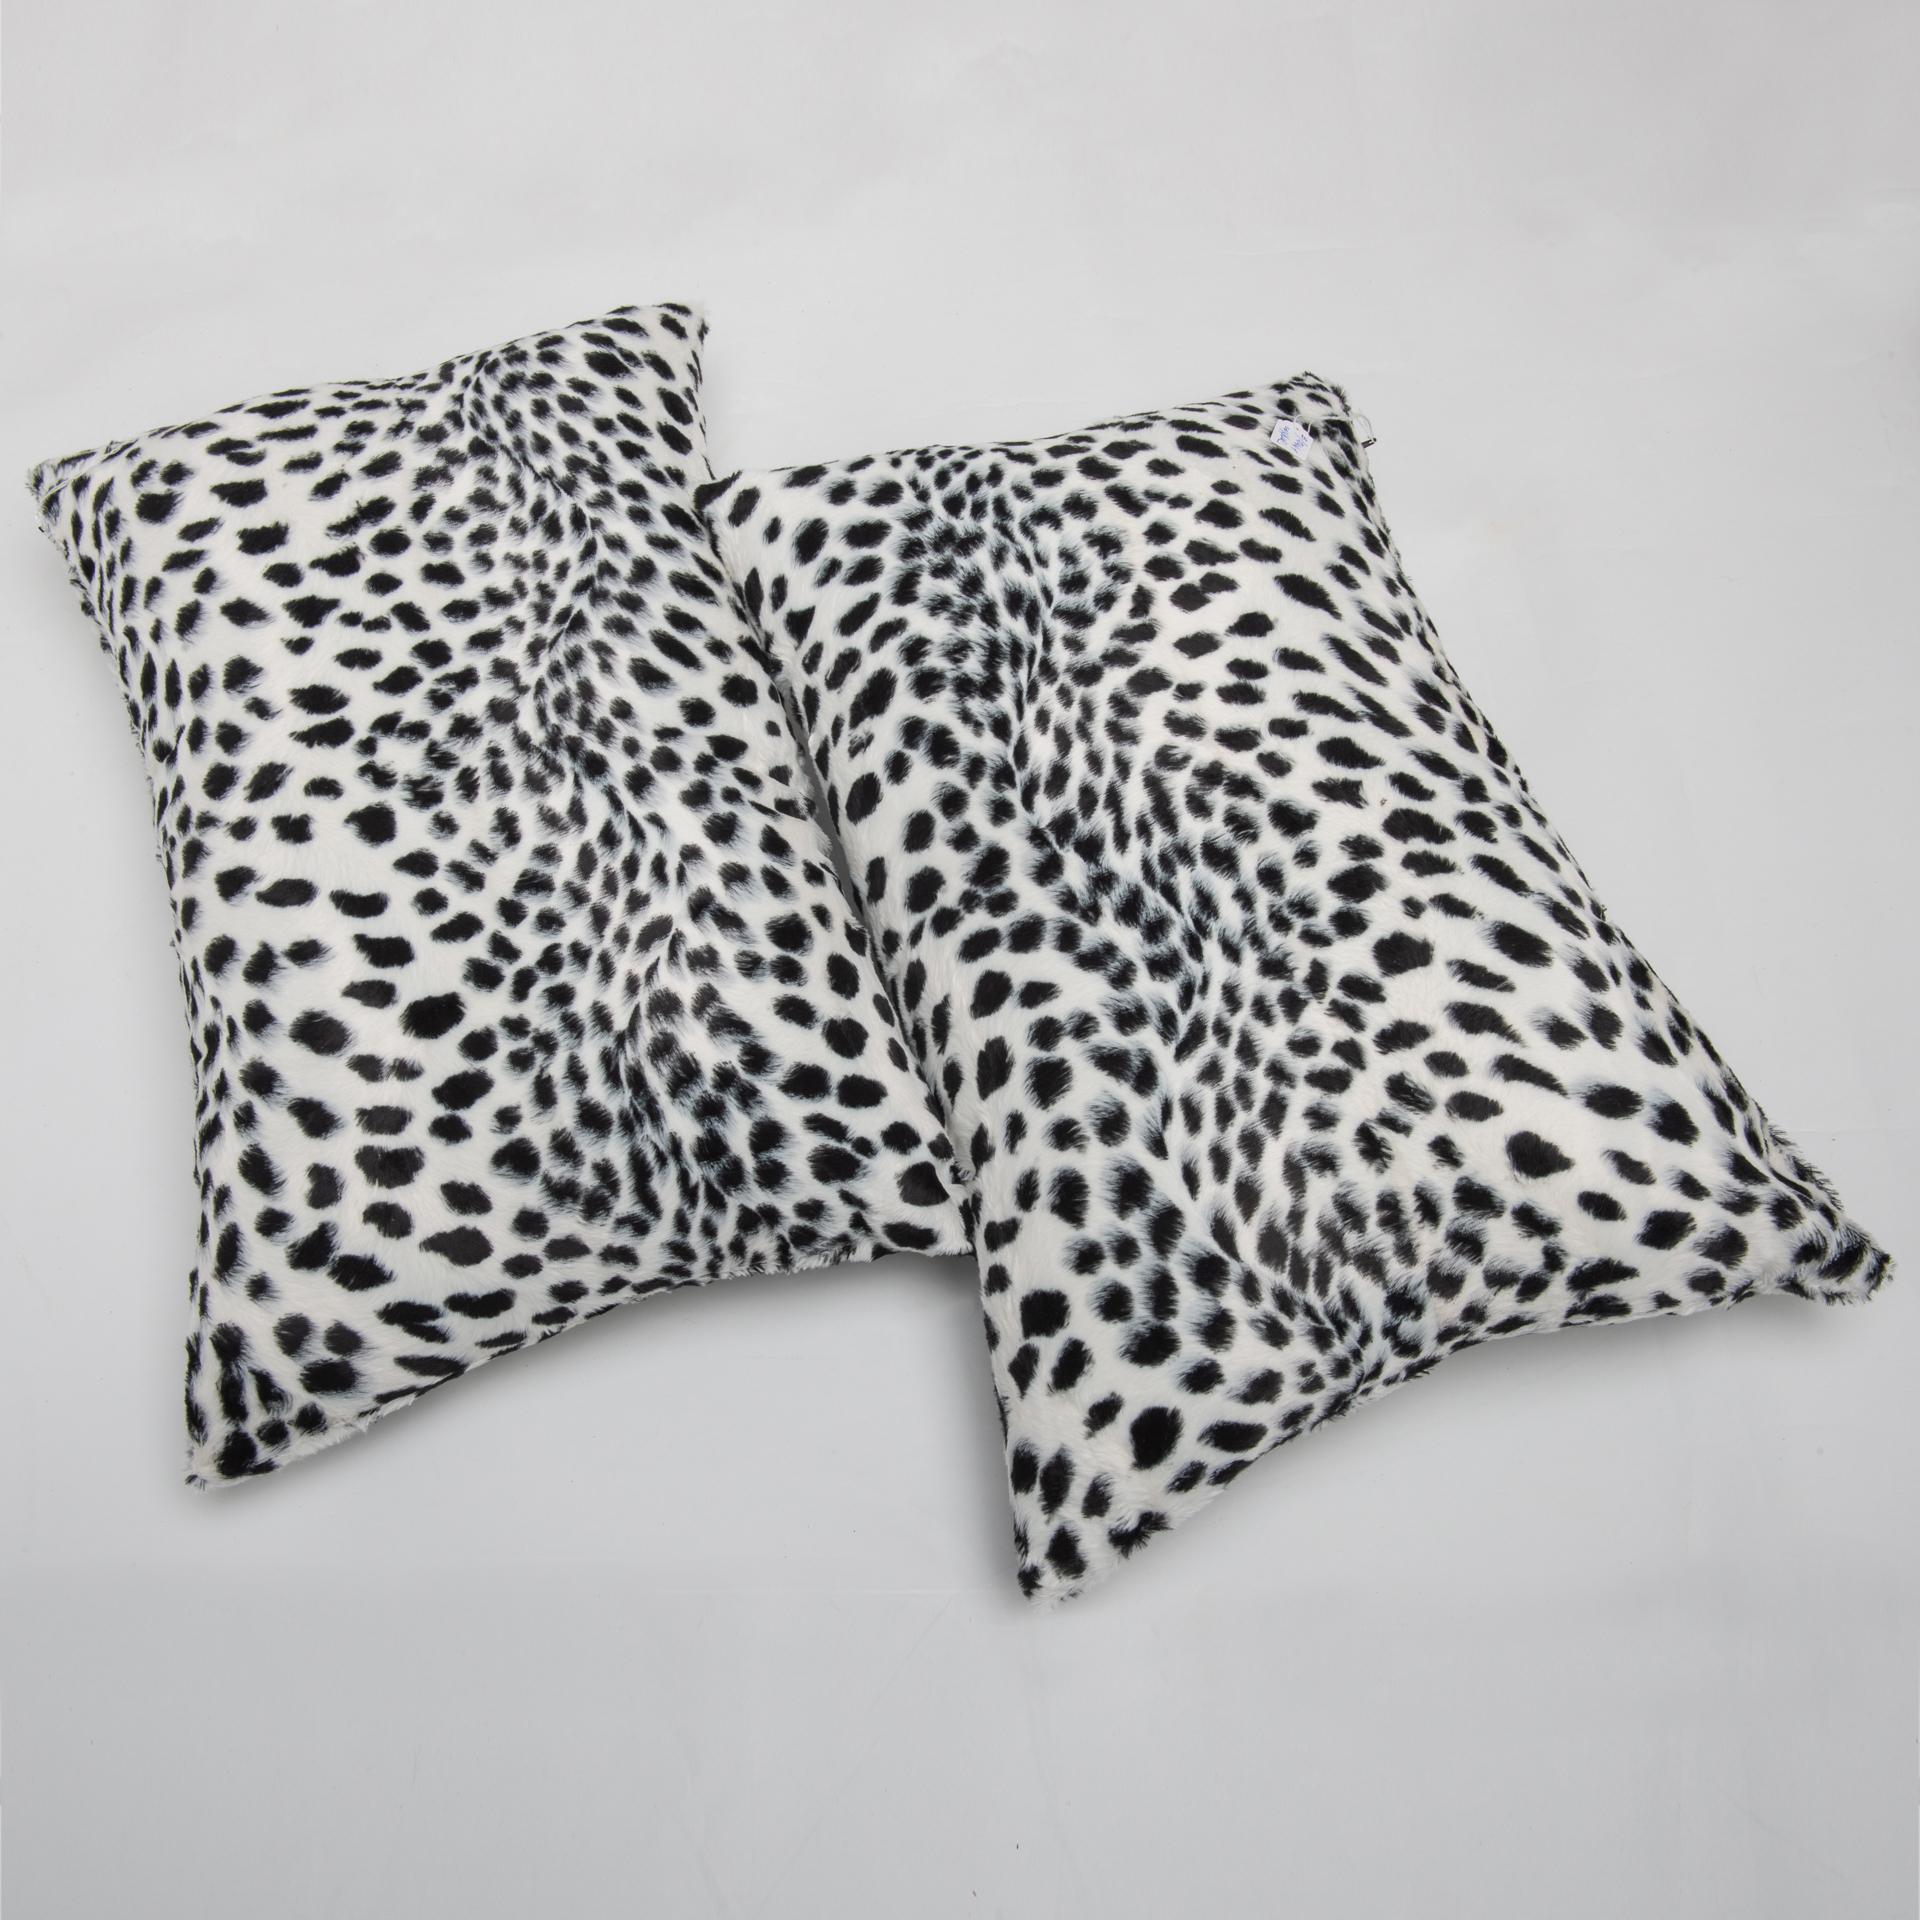 Pair of Pillows in Black and White Dalmatian Fabric In Excellent Condition For Sale In Alessandria, Piemonte